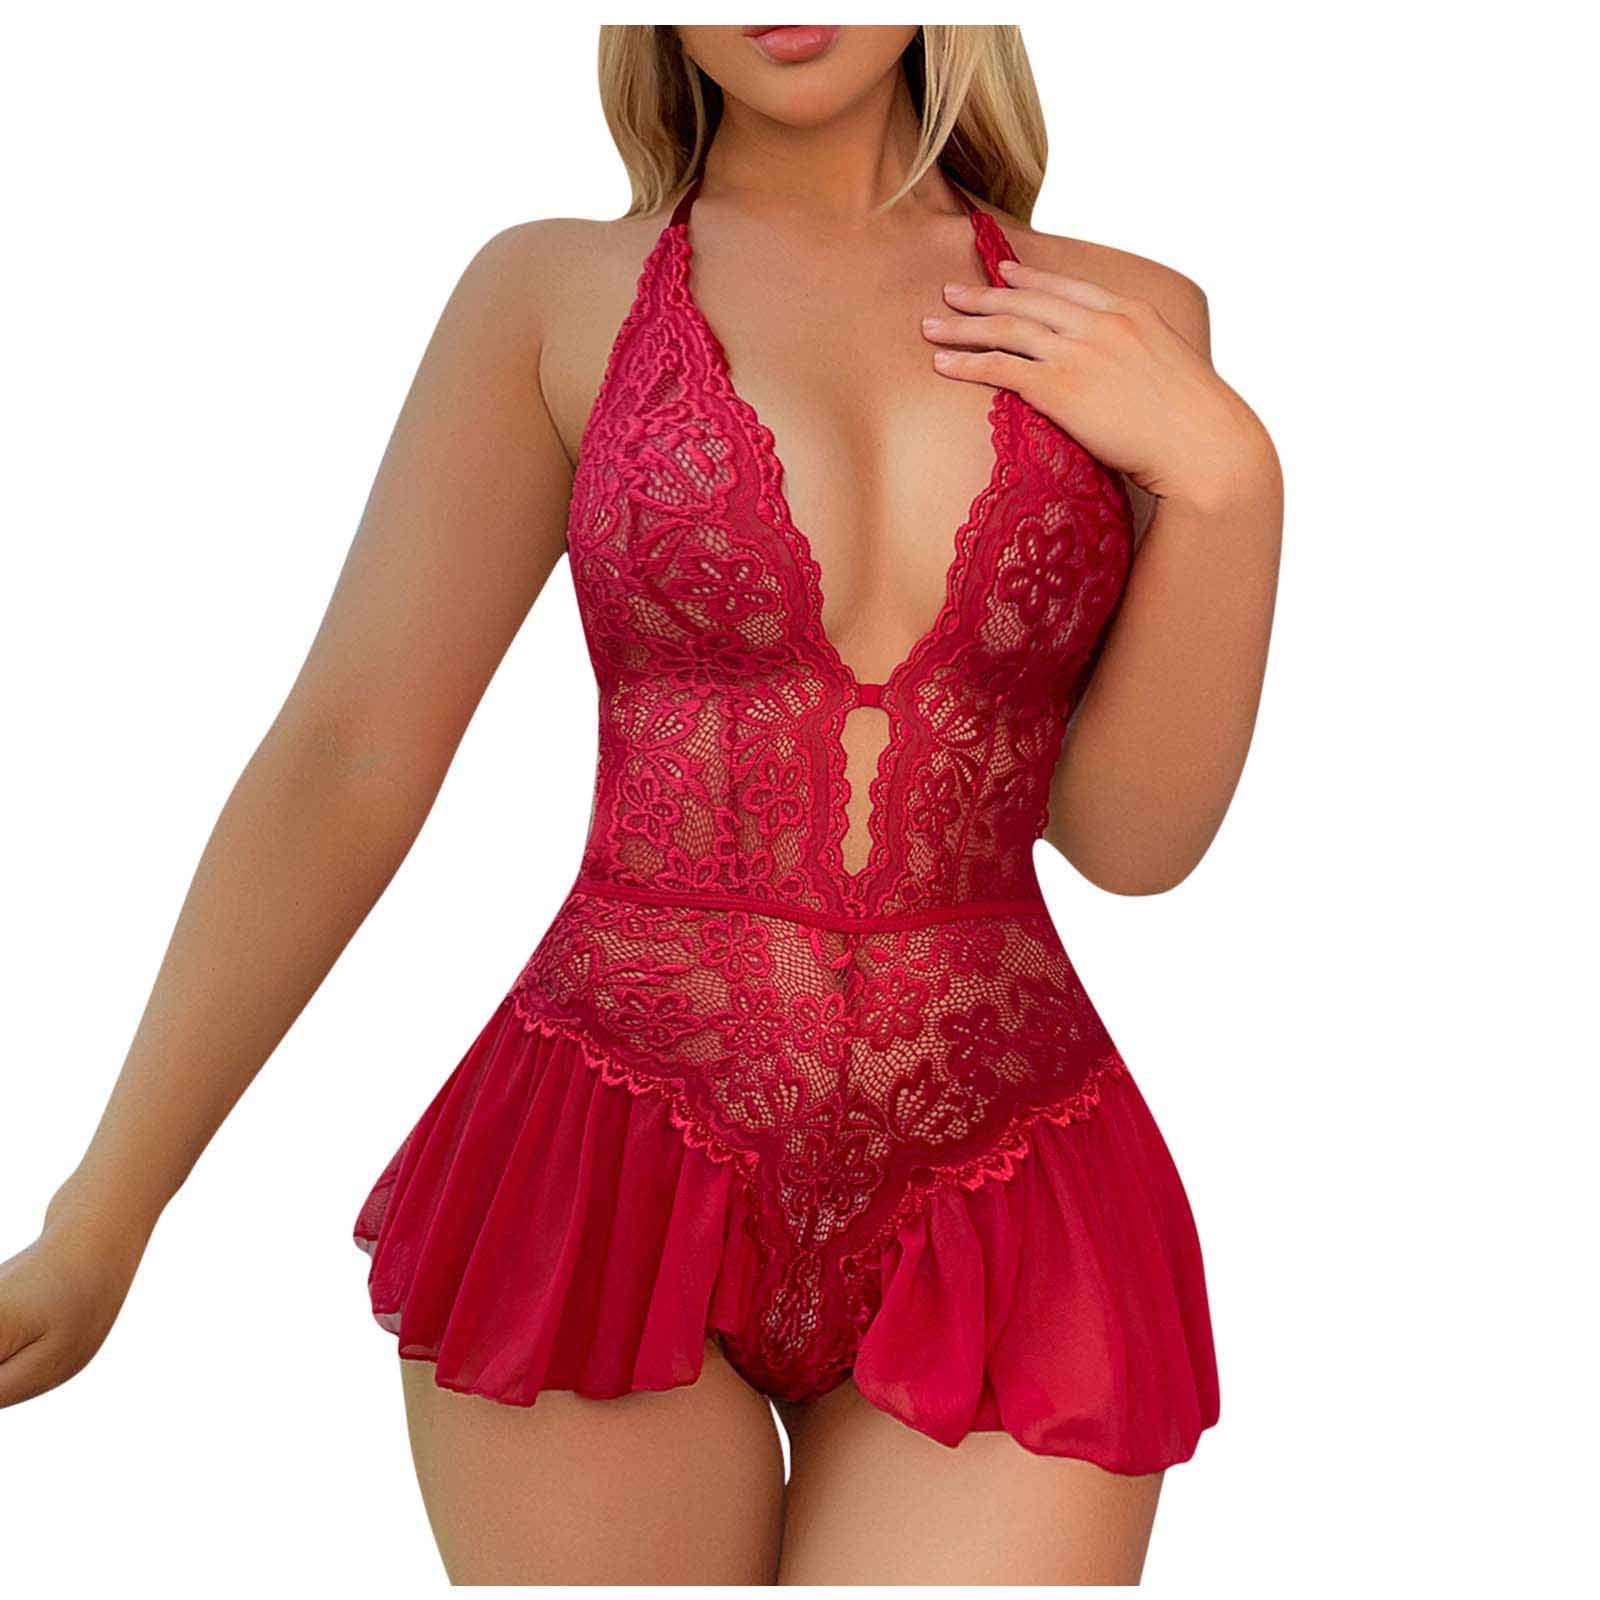 Sexy Lingerie for Women for Sex Naughty Play 2 Piece Sexy Bra and Panty Sets Sexy Nightgowns Soft Modal Nightie Hollow Out Cutout Wasit Leotard Teddy Lingerie Matching Underwear for Couples -